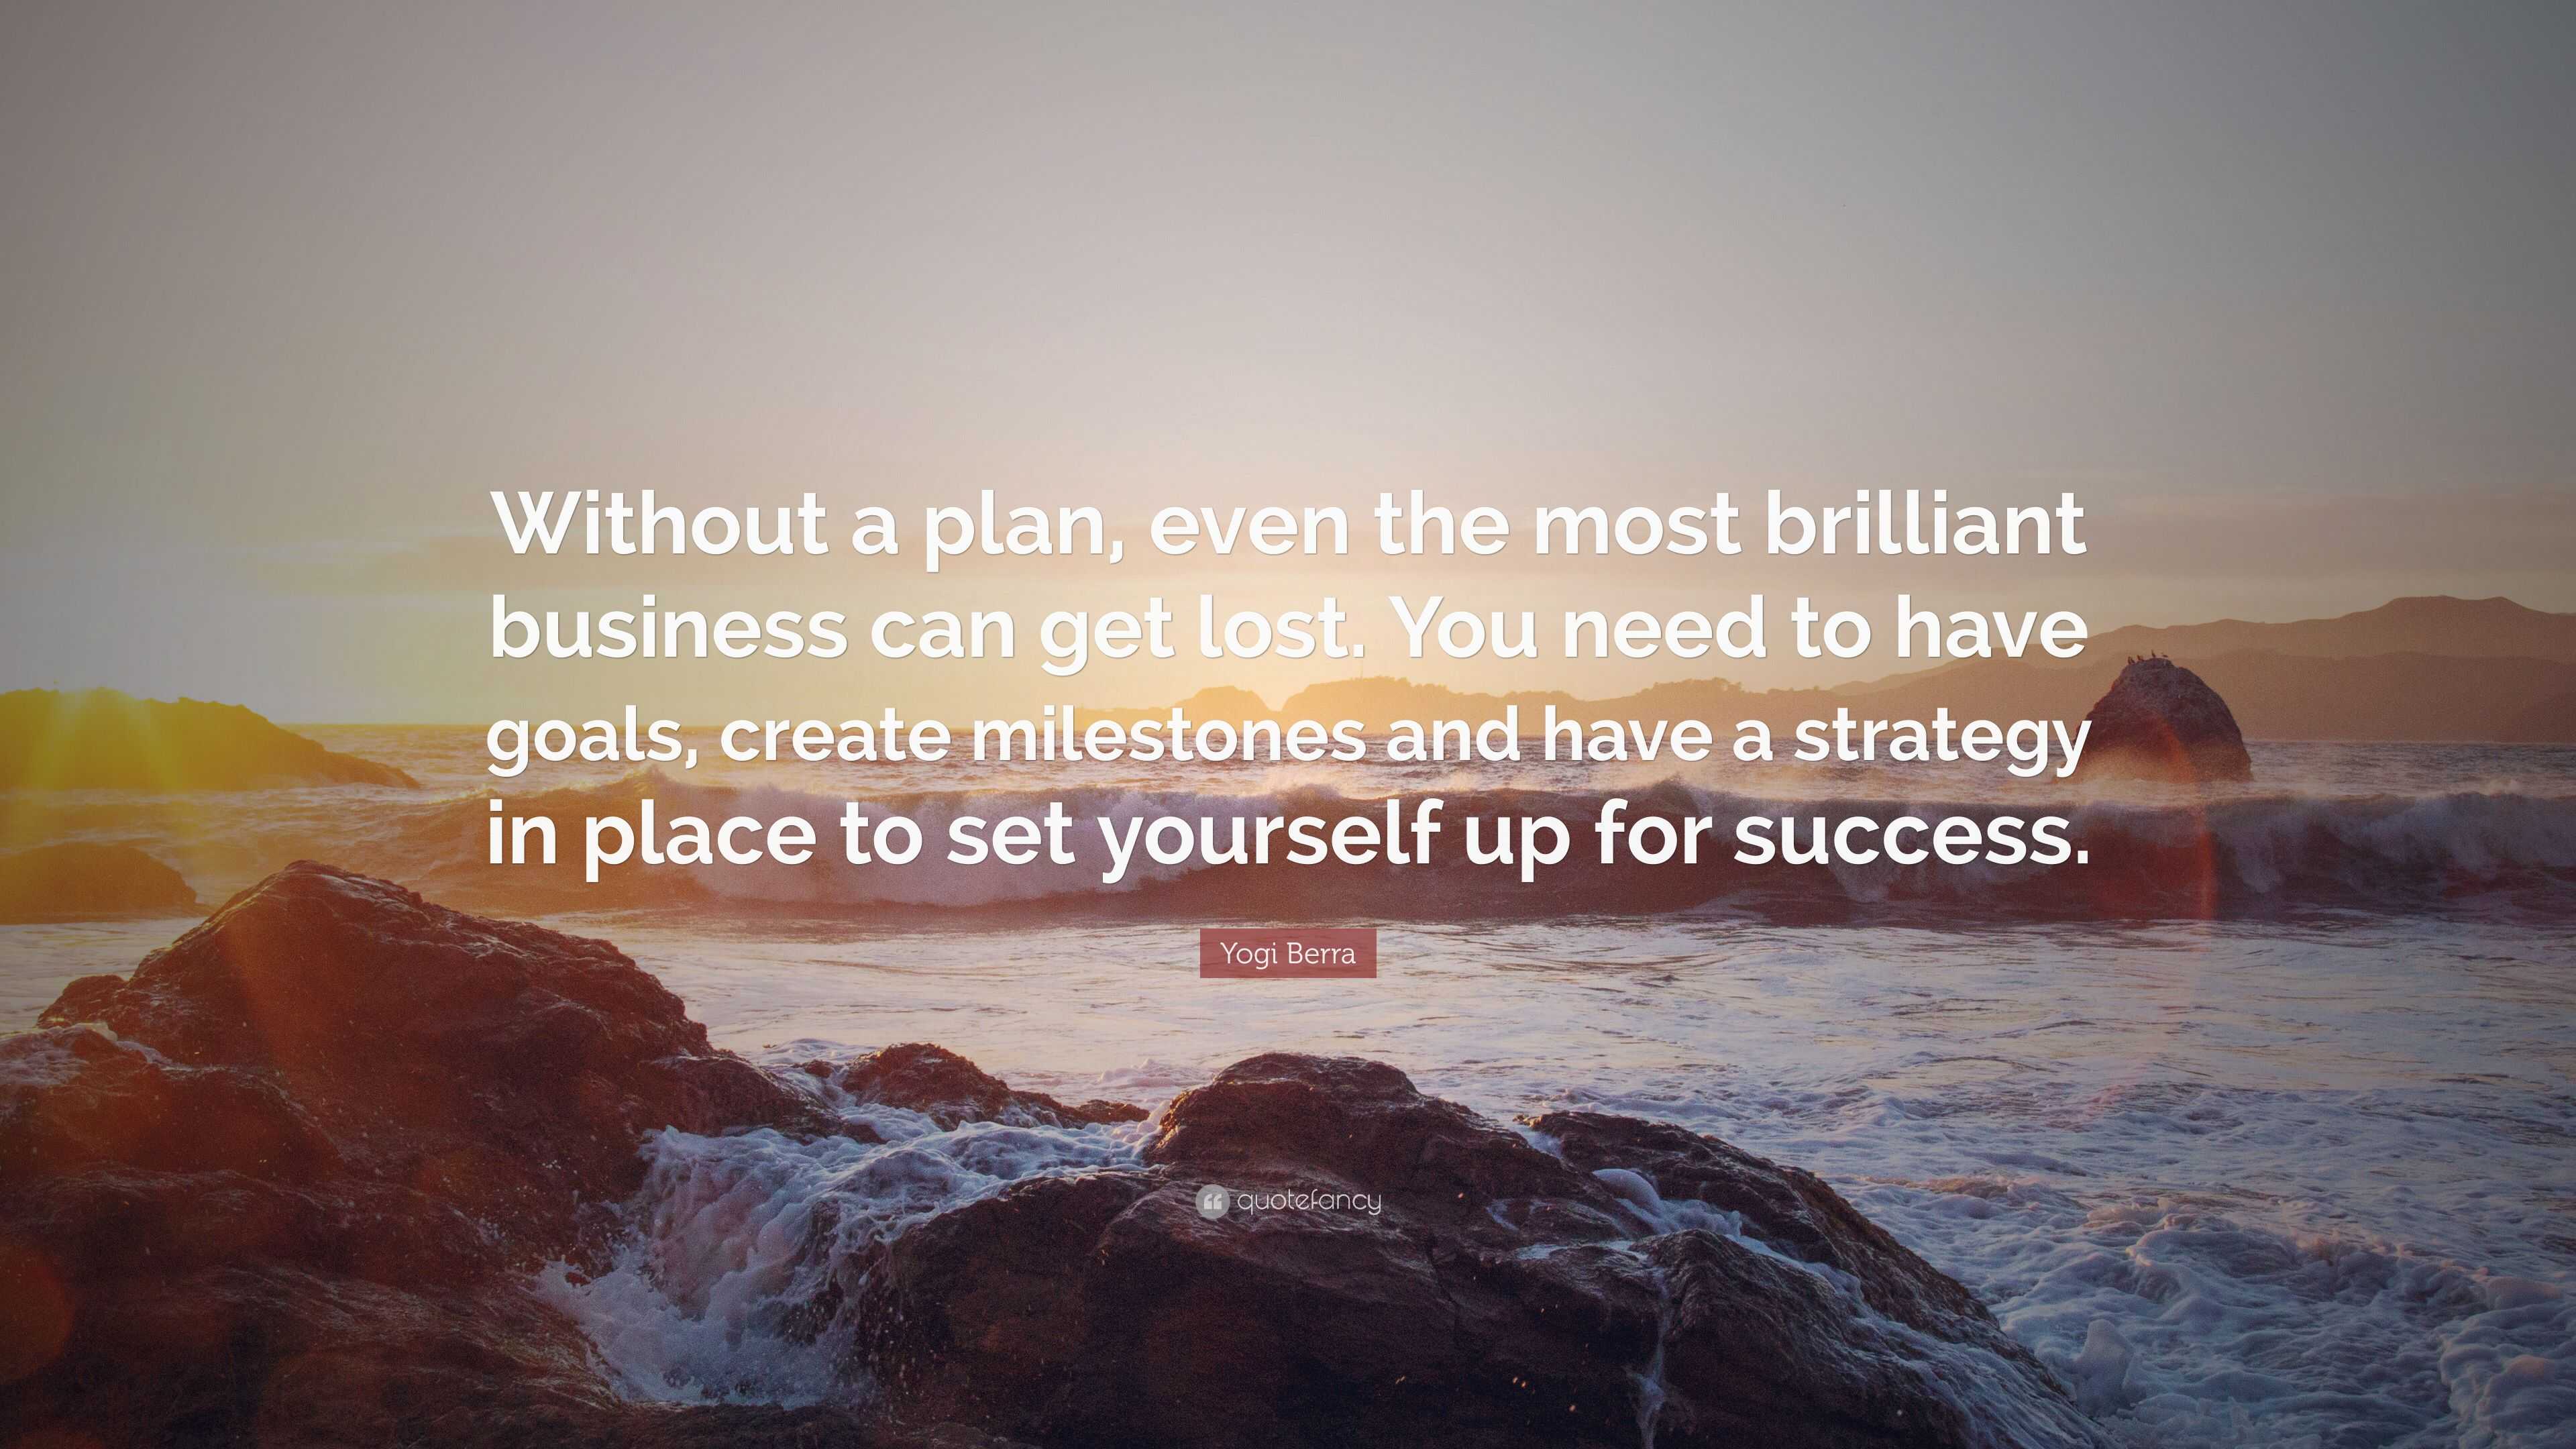 Yogi Berra Quote: “Without a plan, even the most brilliant business can get  lost. You need to have goals, create milestones and have a stra”